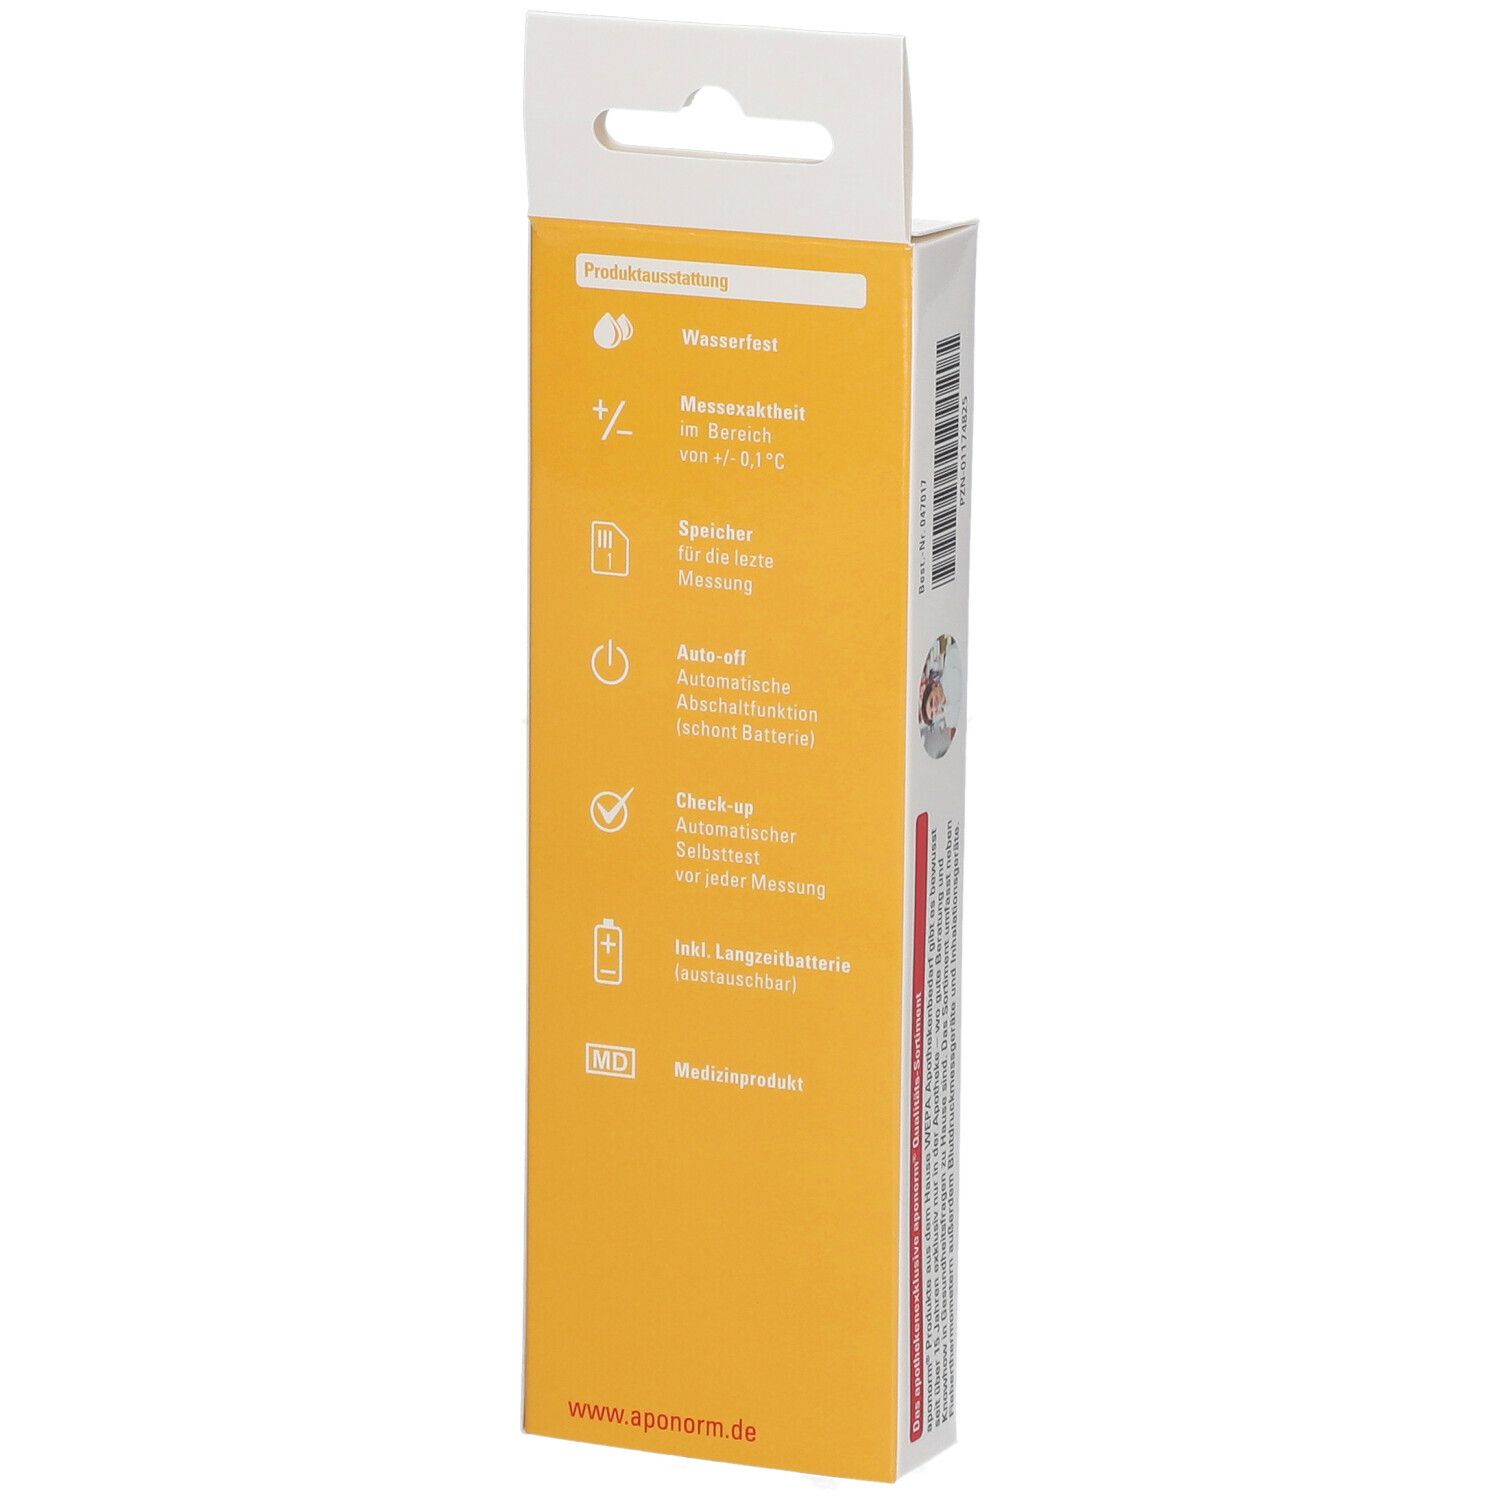 aponorm® Stabthermometer flexible